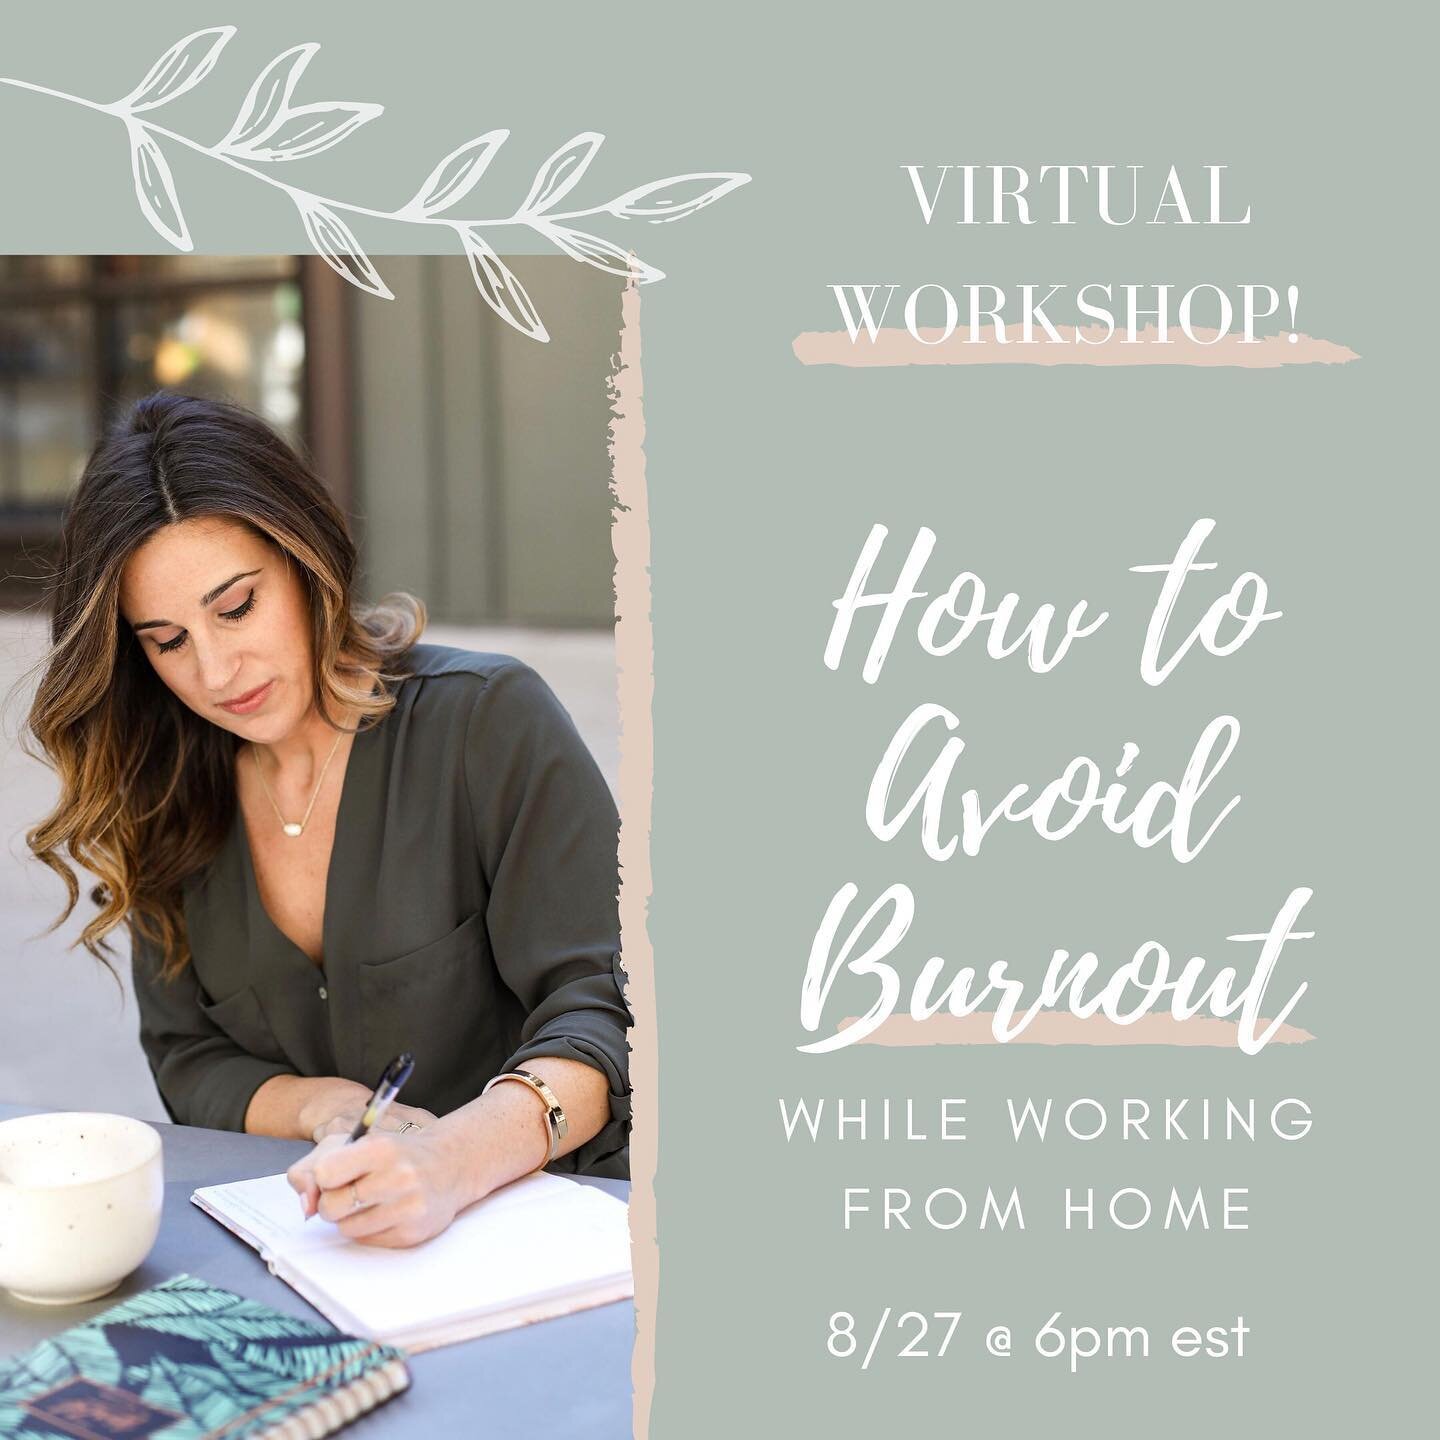 Reserve your spot 👉🏻 link in bio!

Stressed navigating the WFH lifestyle? You might have more time on your hands and loving wearing those yoga pants all day yet you&rsquo;re feeling more overwhelmed &amp; frustrated with balancing all the demands c